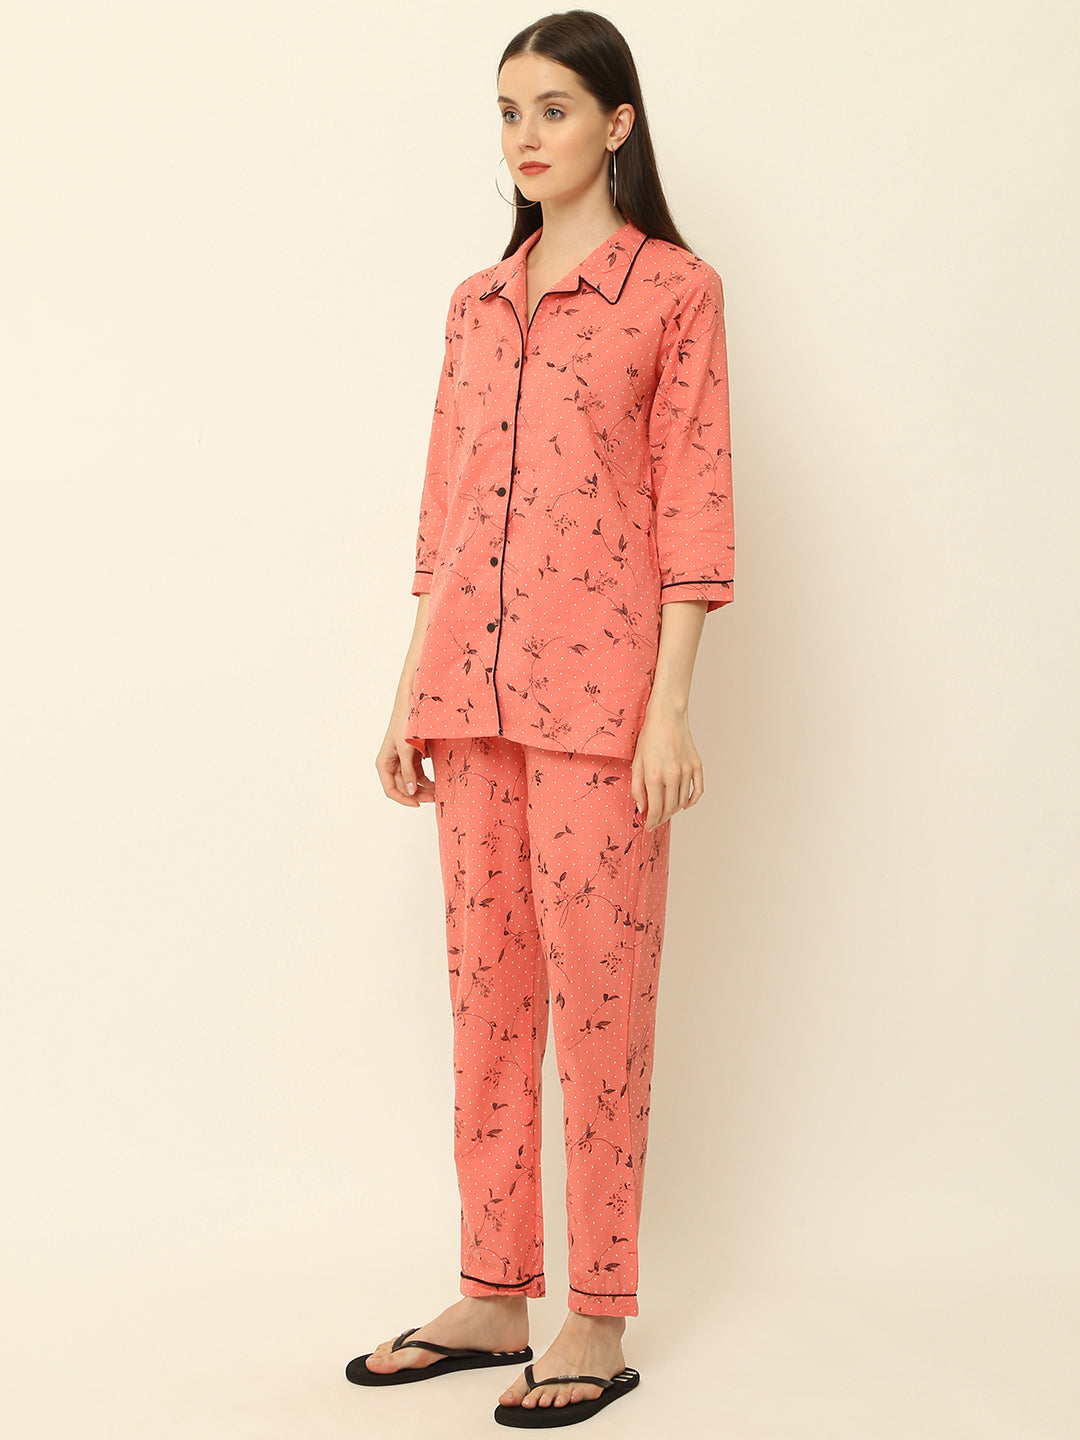 Baby Pink Floral Gold Printed Cotton Night Suit